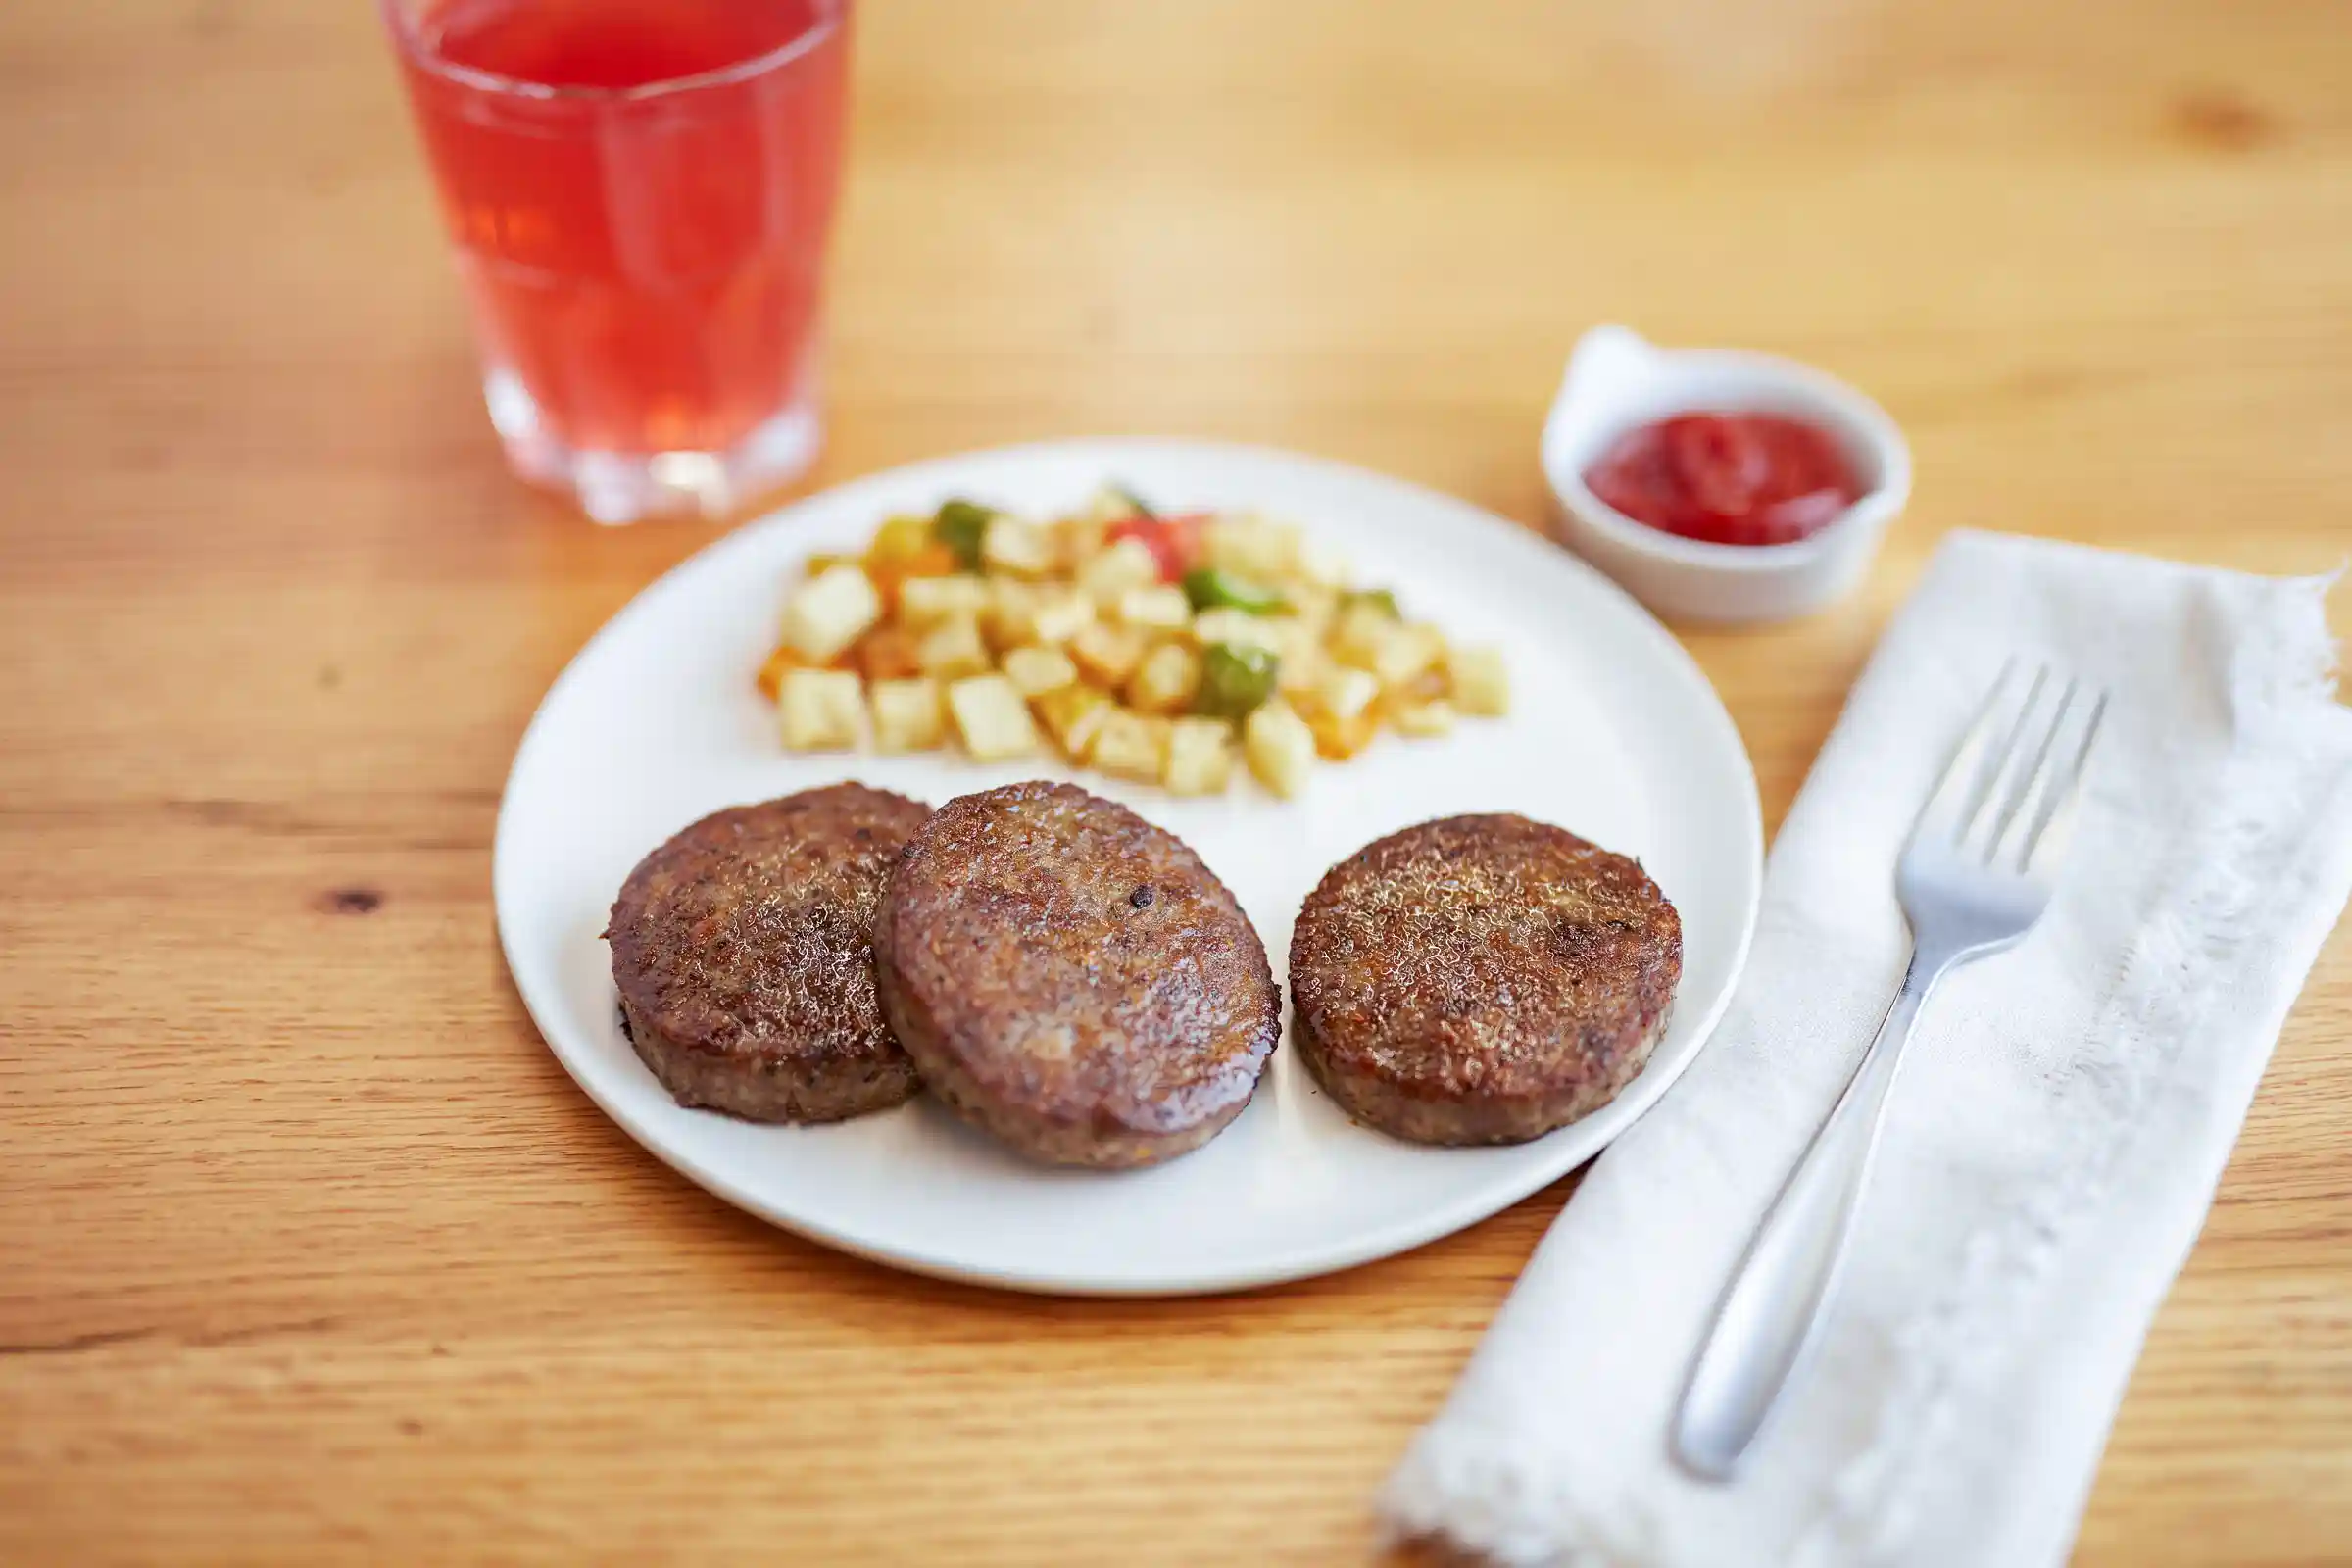 Rudy's Farm® Raw Whole Hog Country Style Sausage Patties, 2.875 Inch, 2.0 ozhttps://images.salsify.com/image/upload/s--P1zNPika--/q_25/rid3ebixakeauggyae10.webp